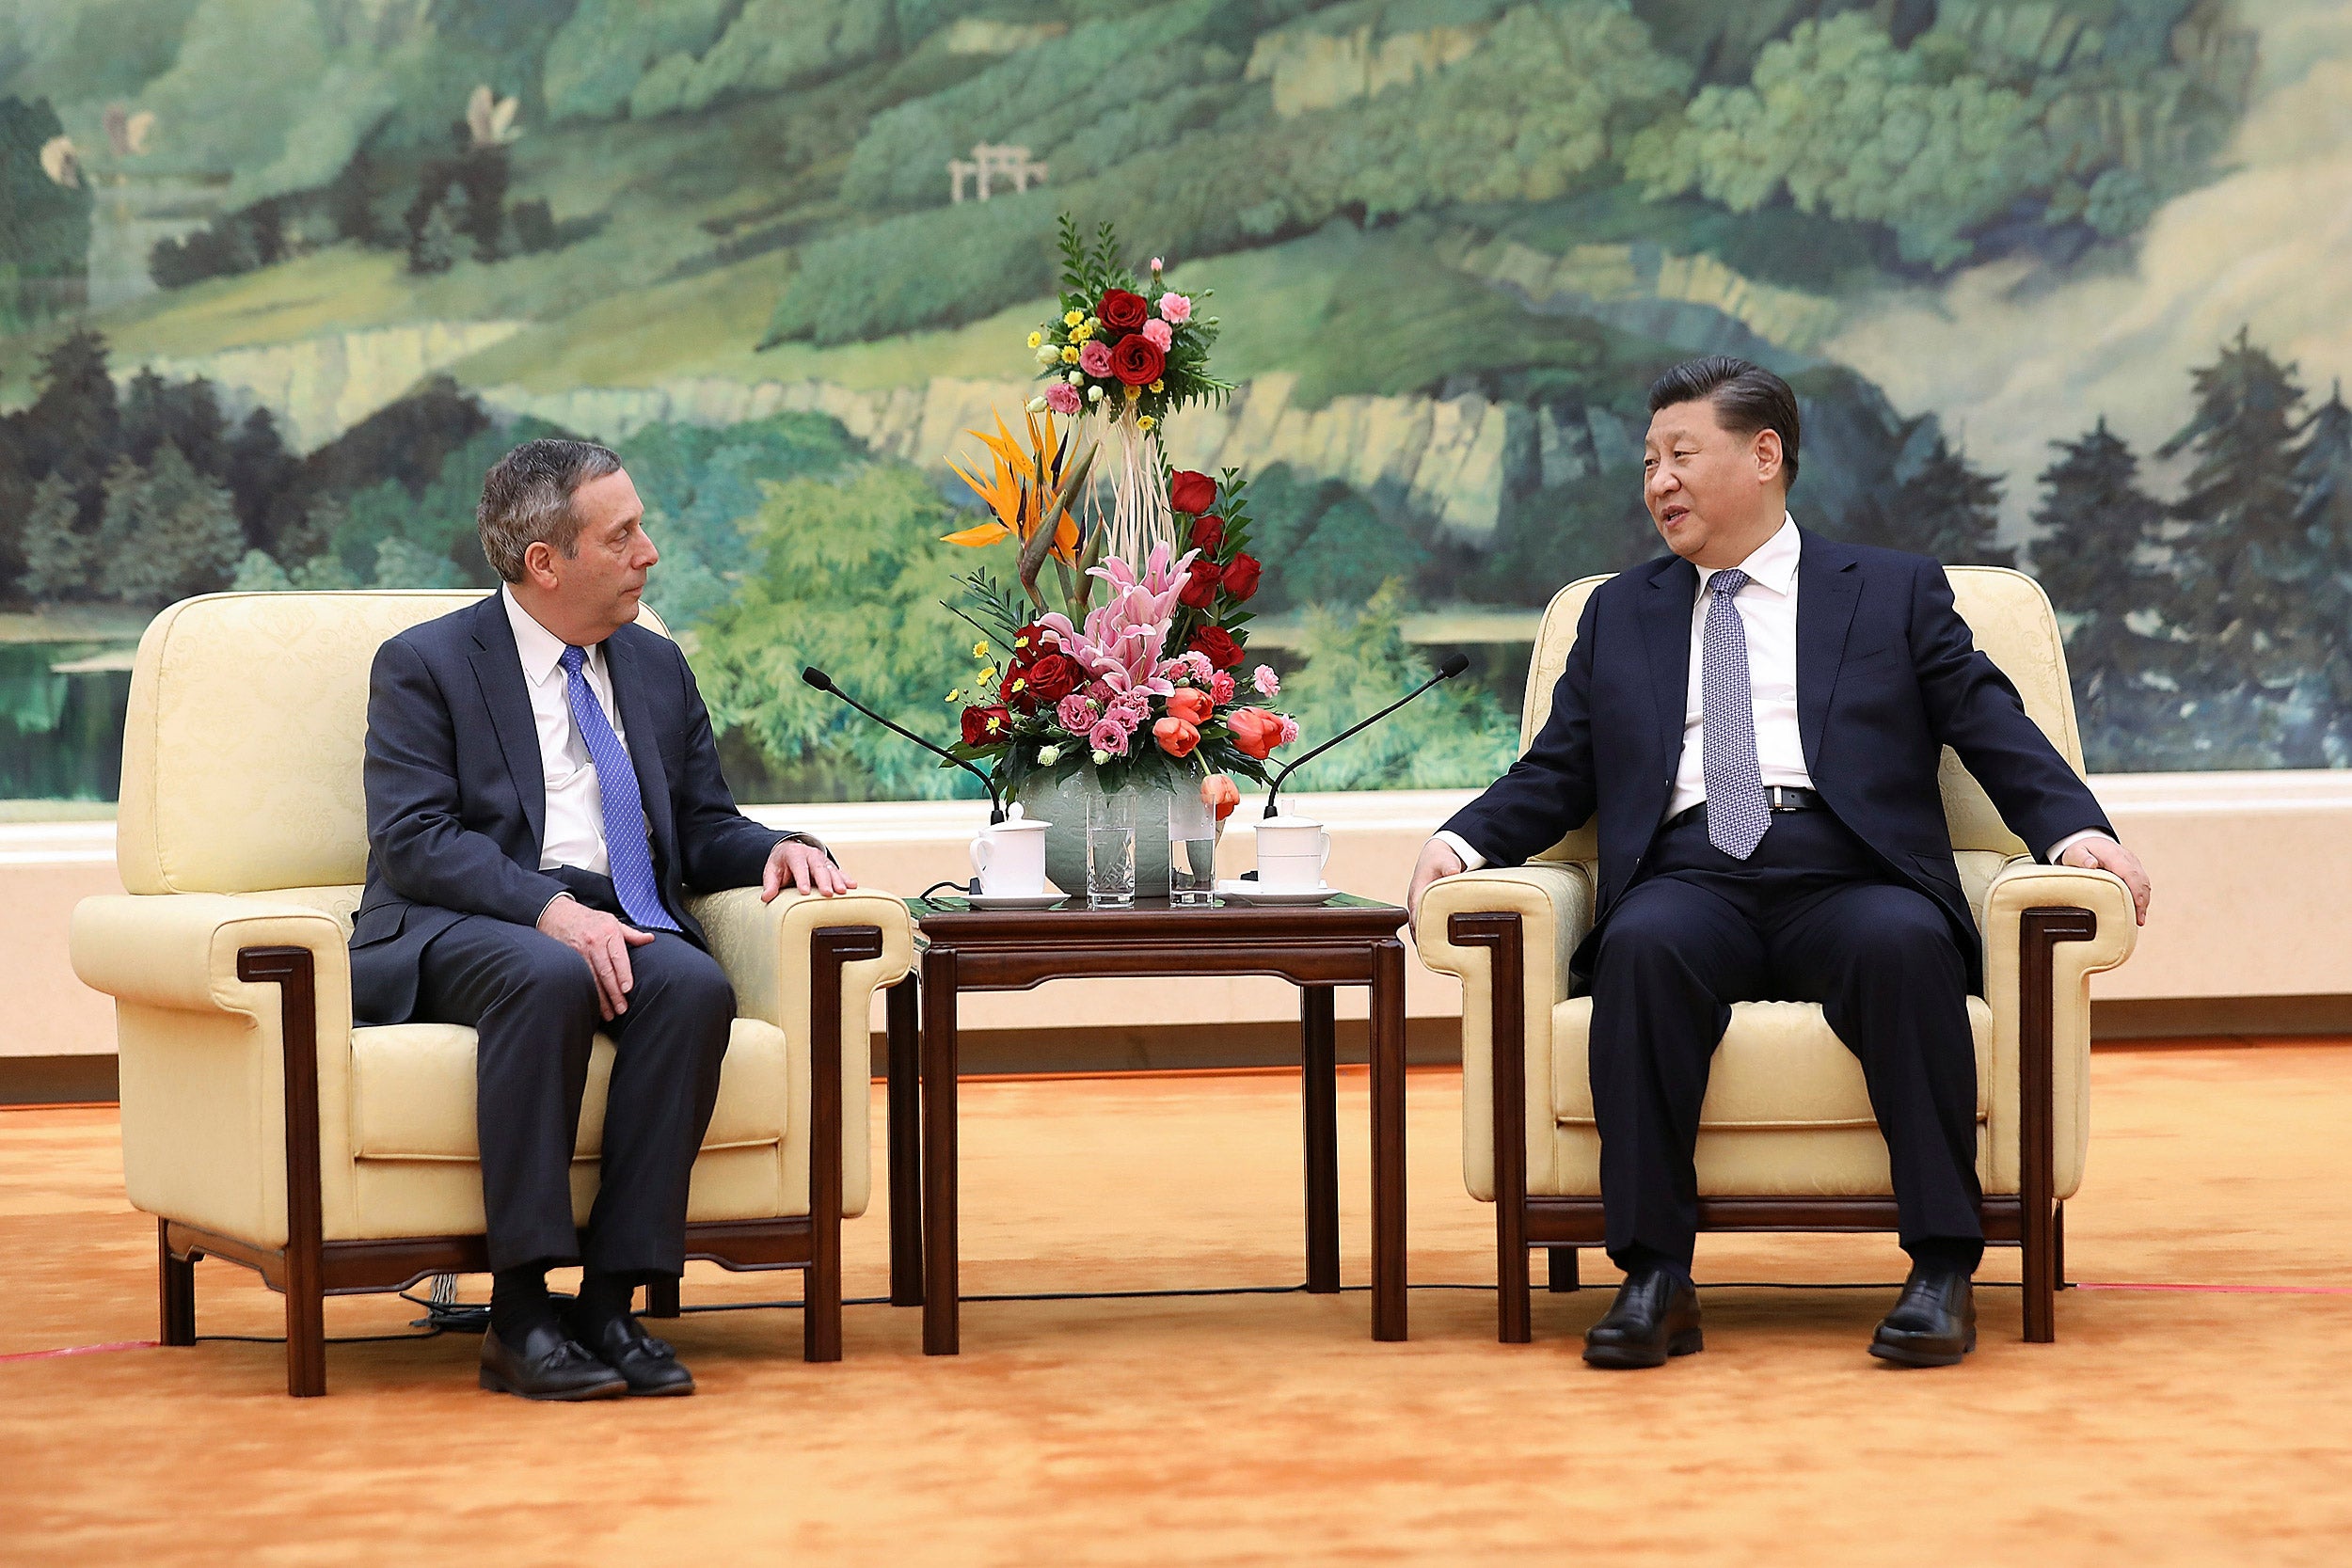 Harvard President Larry Bacow (left) meets with Chinese President Xi Jinping.